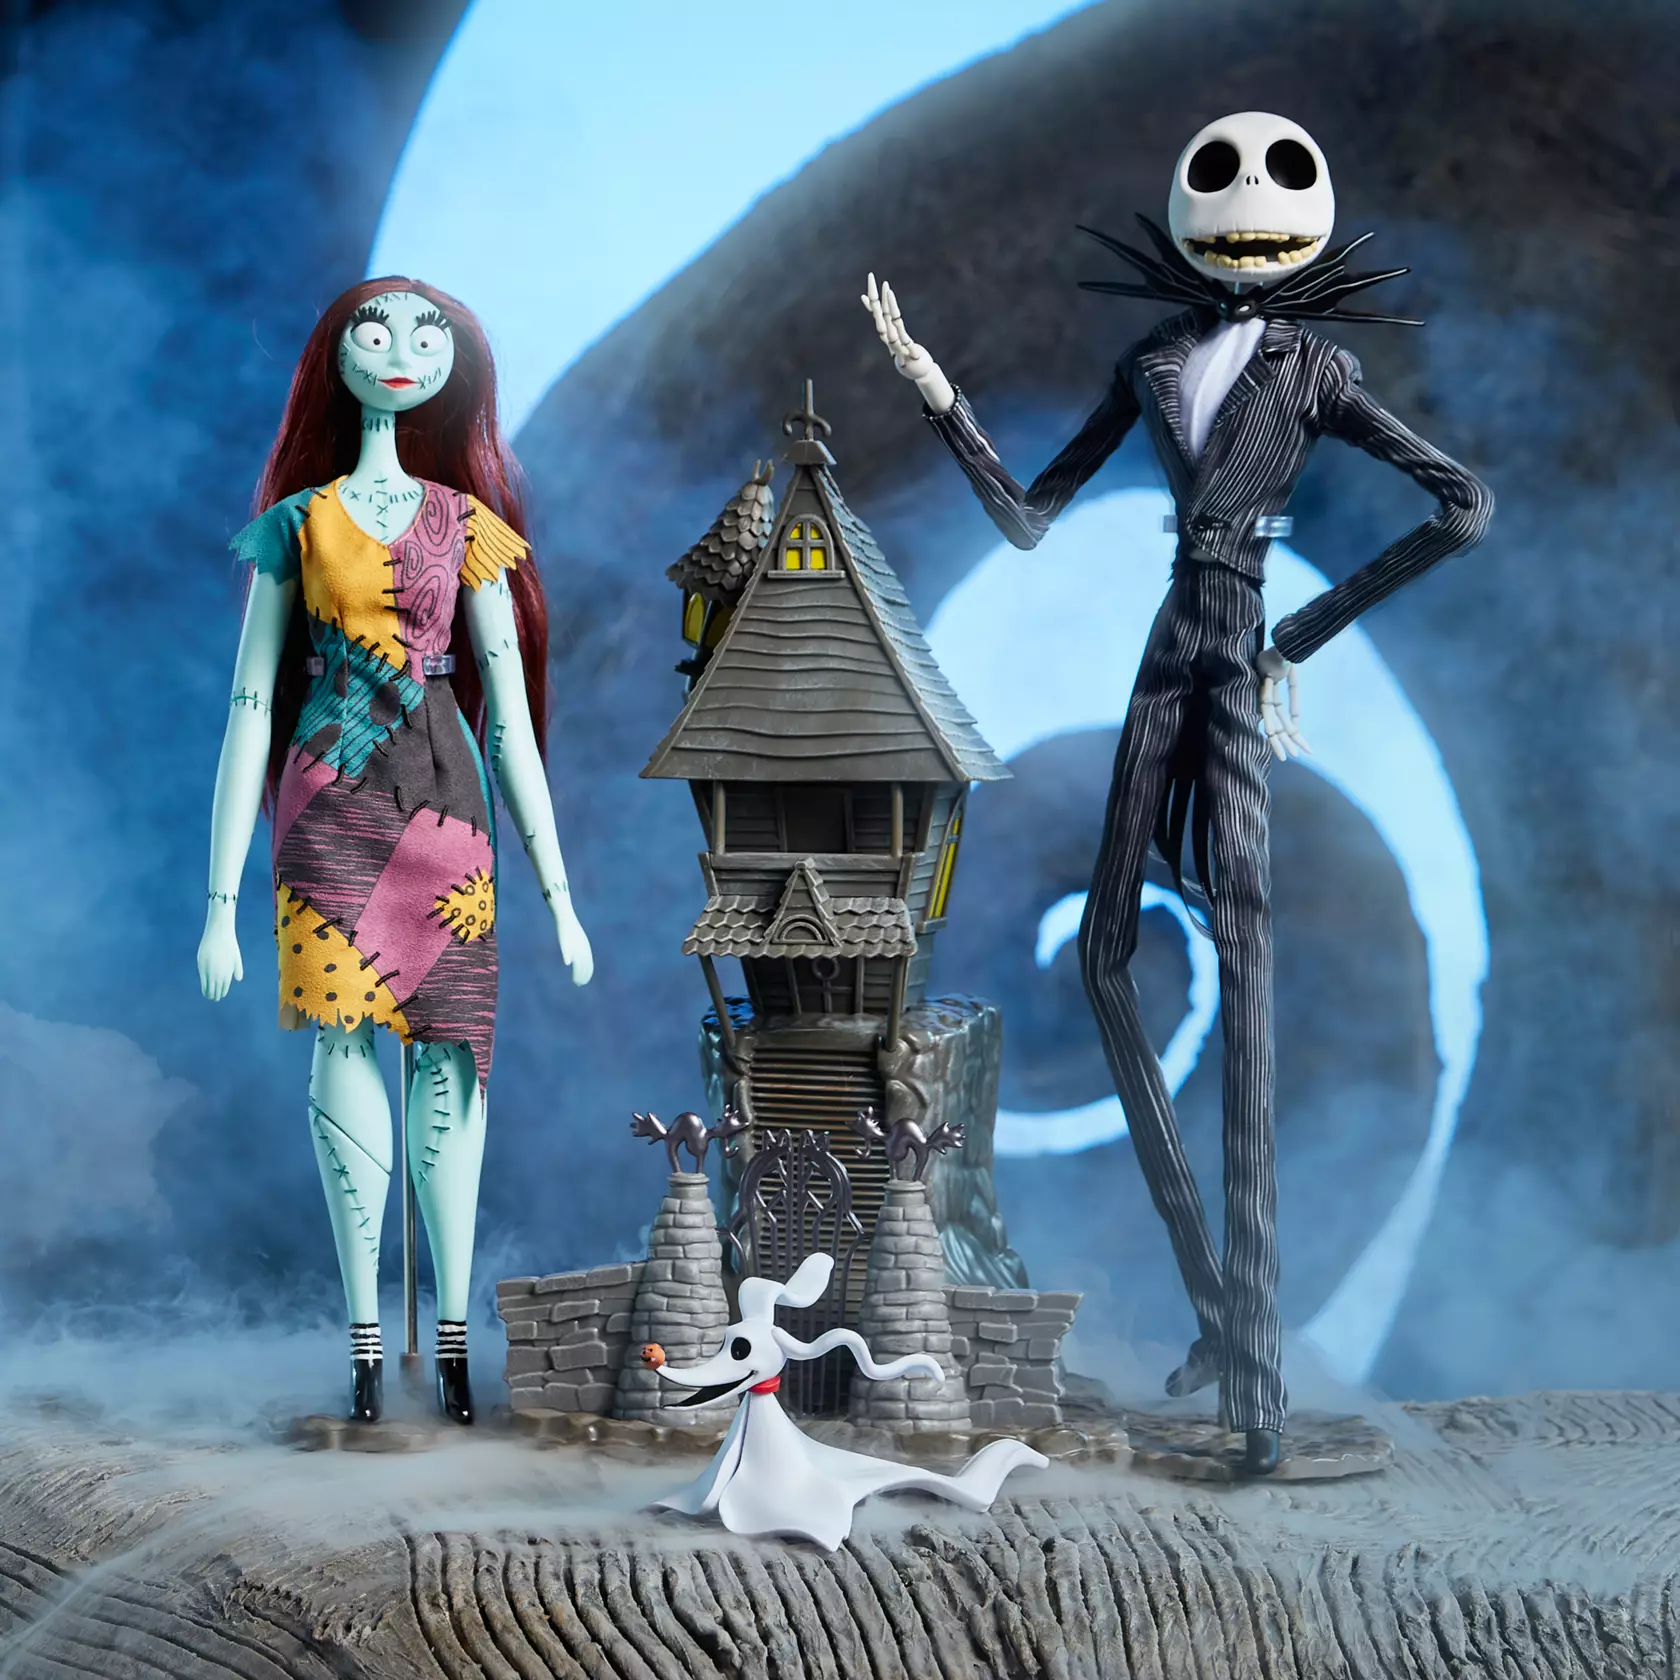 This Little People Collector 'The Nightmare Before Christmas' Set